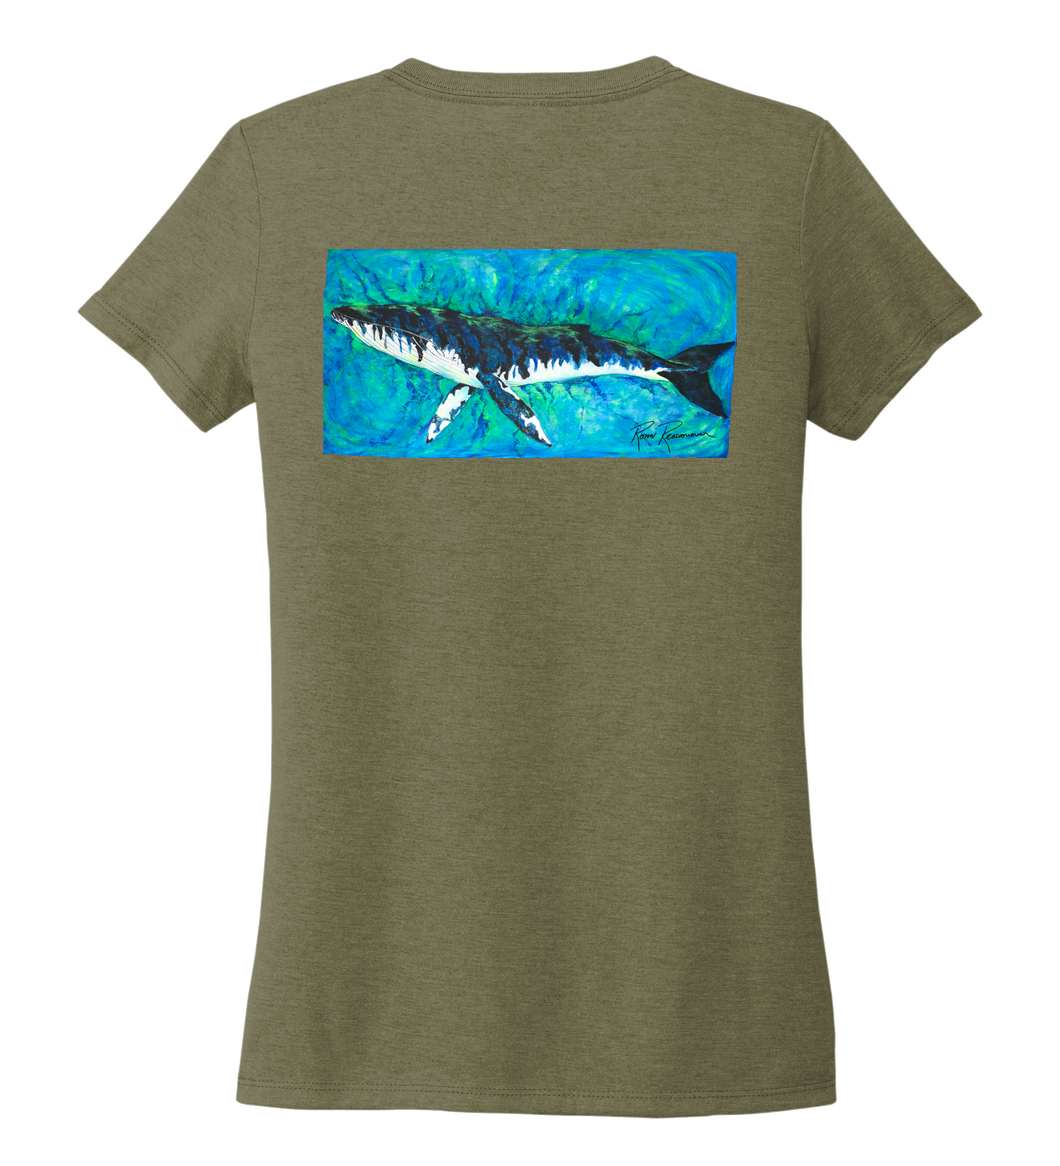 Ronnie Reasonover, The Whale, Women's V-neck T-shirt in Earthy Green